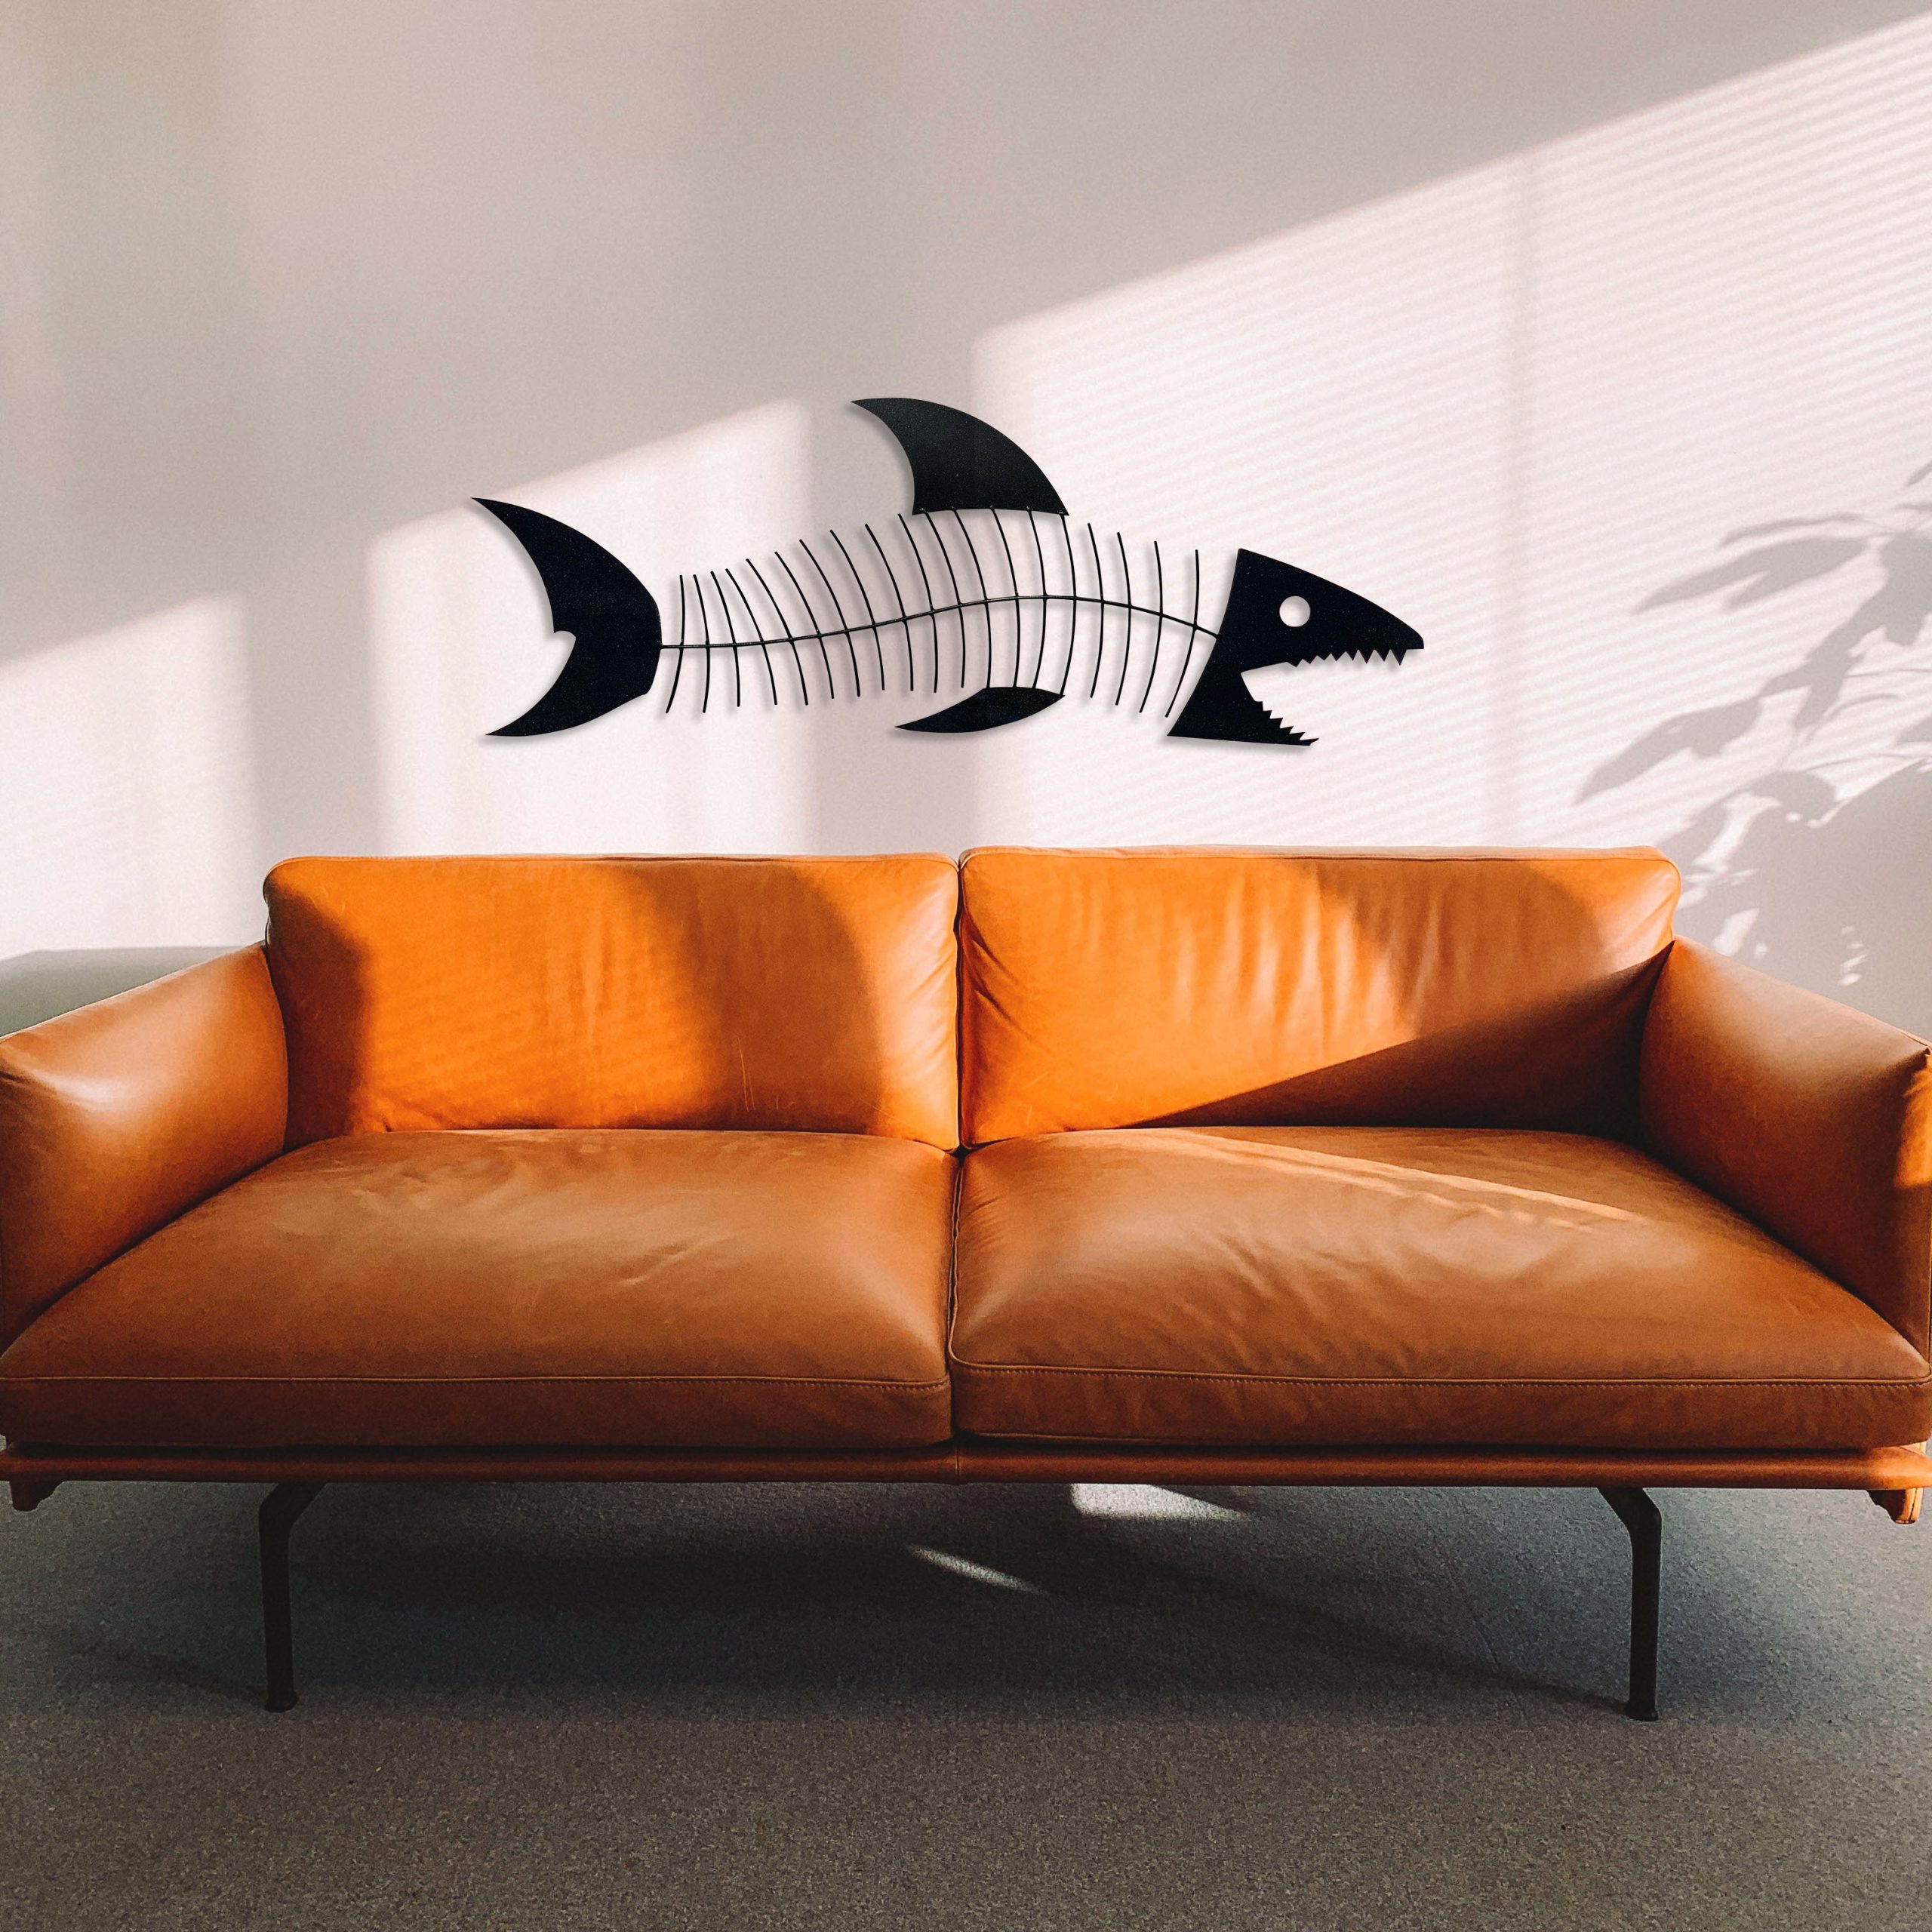 Shark-bones-over-couch-scaled